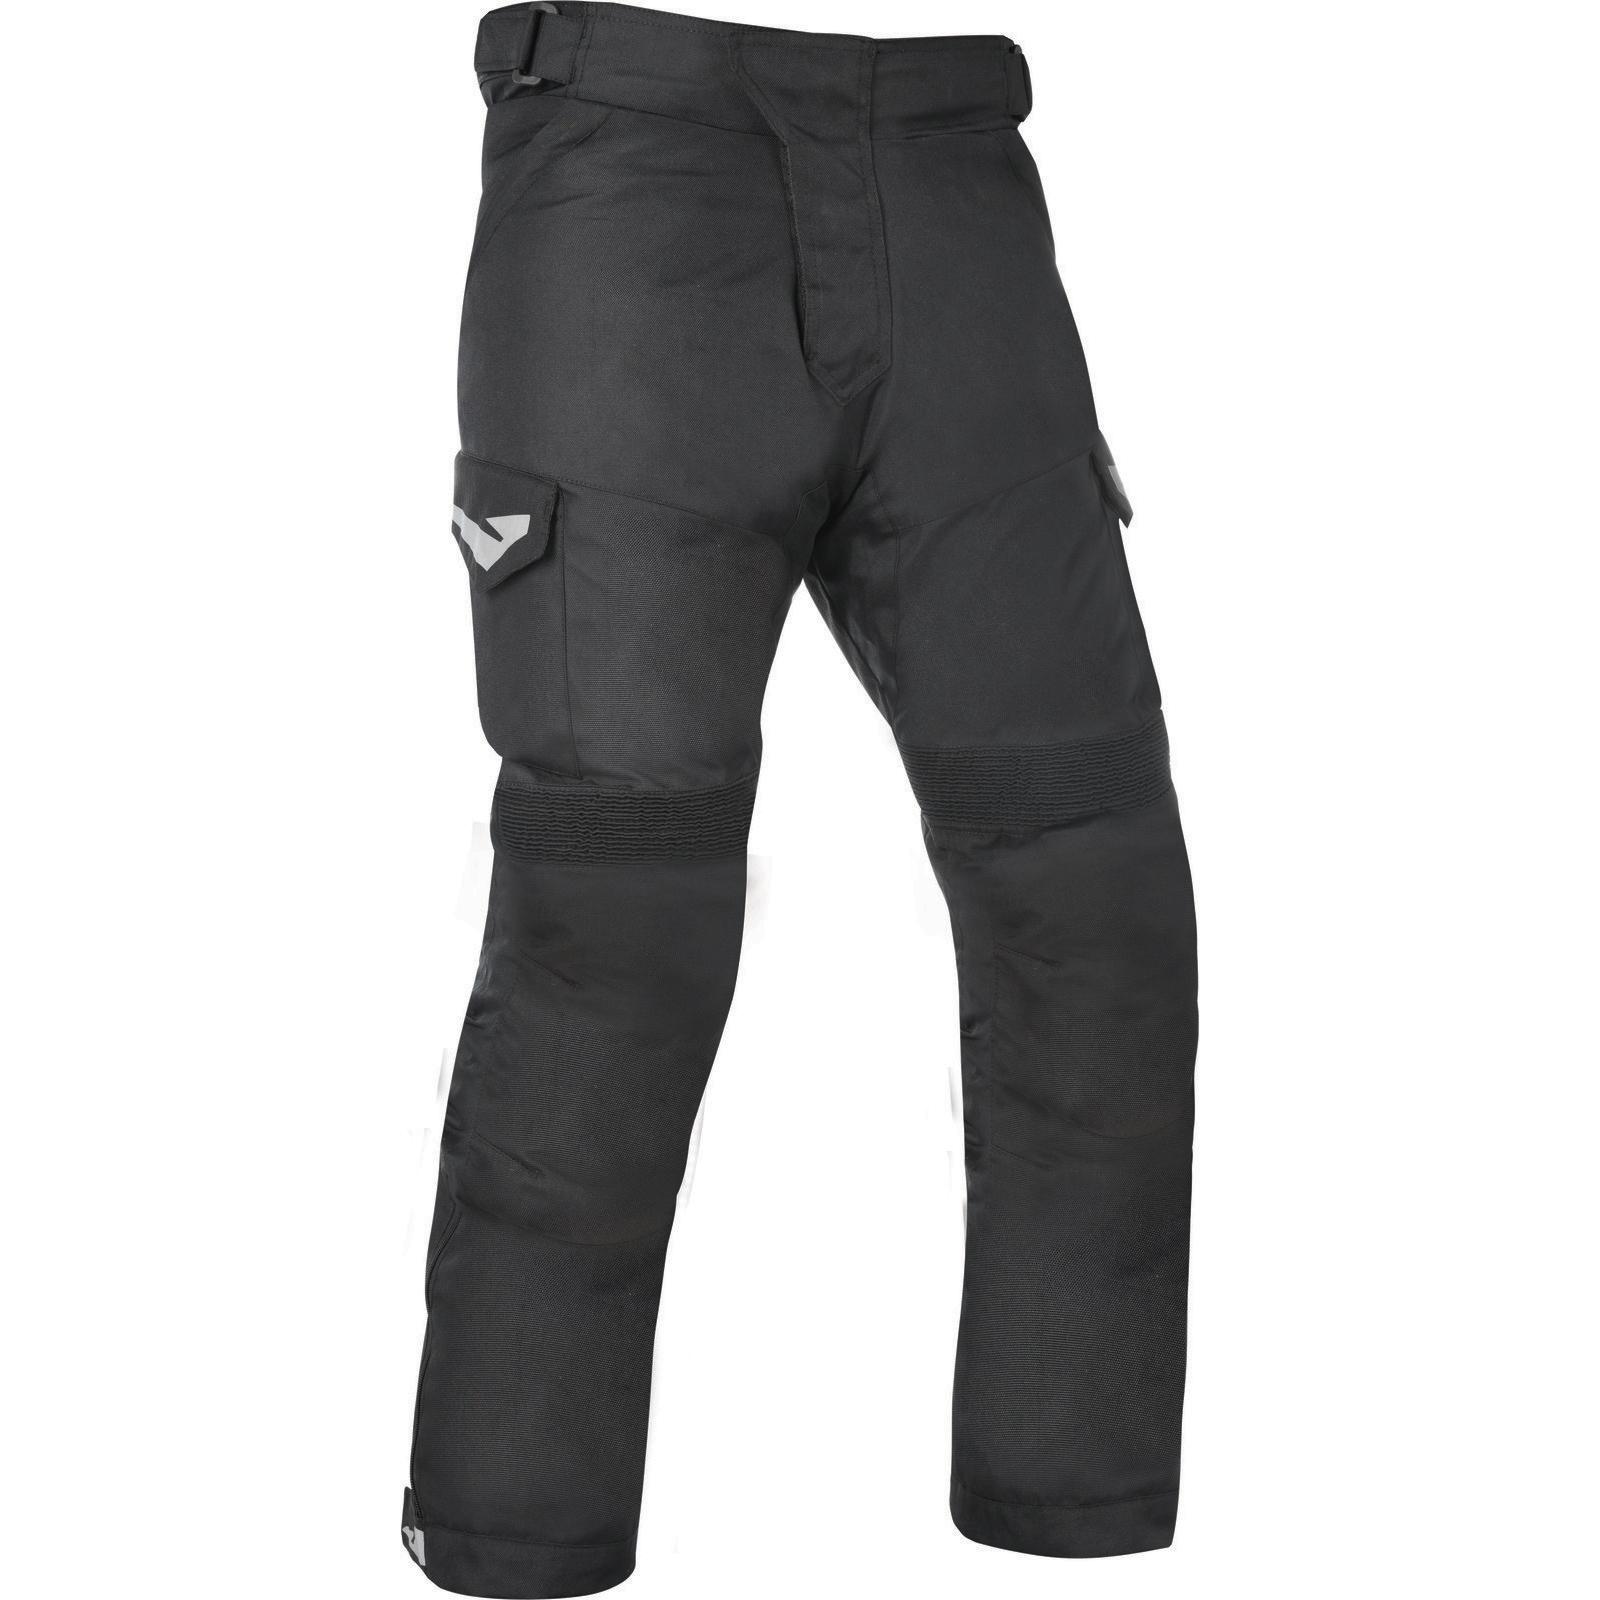 Richa Atlantic GTX jacket and trousers review - OVERLAND magazine